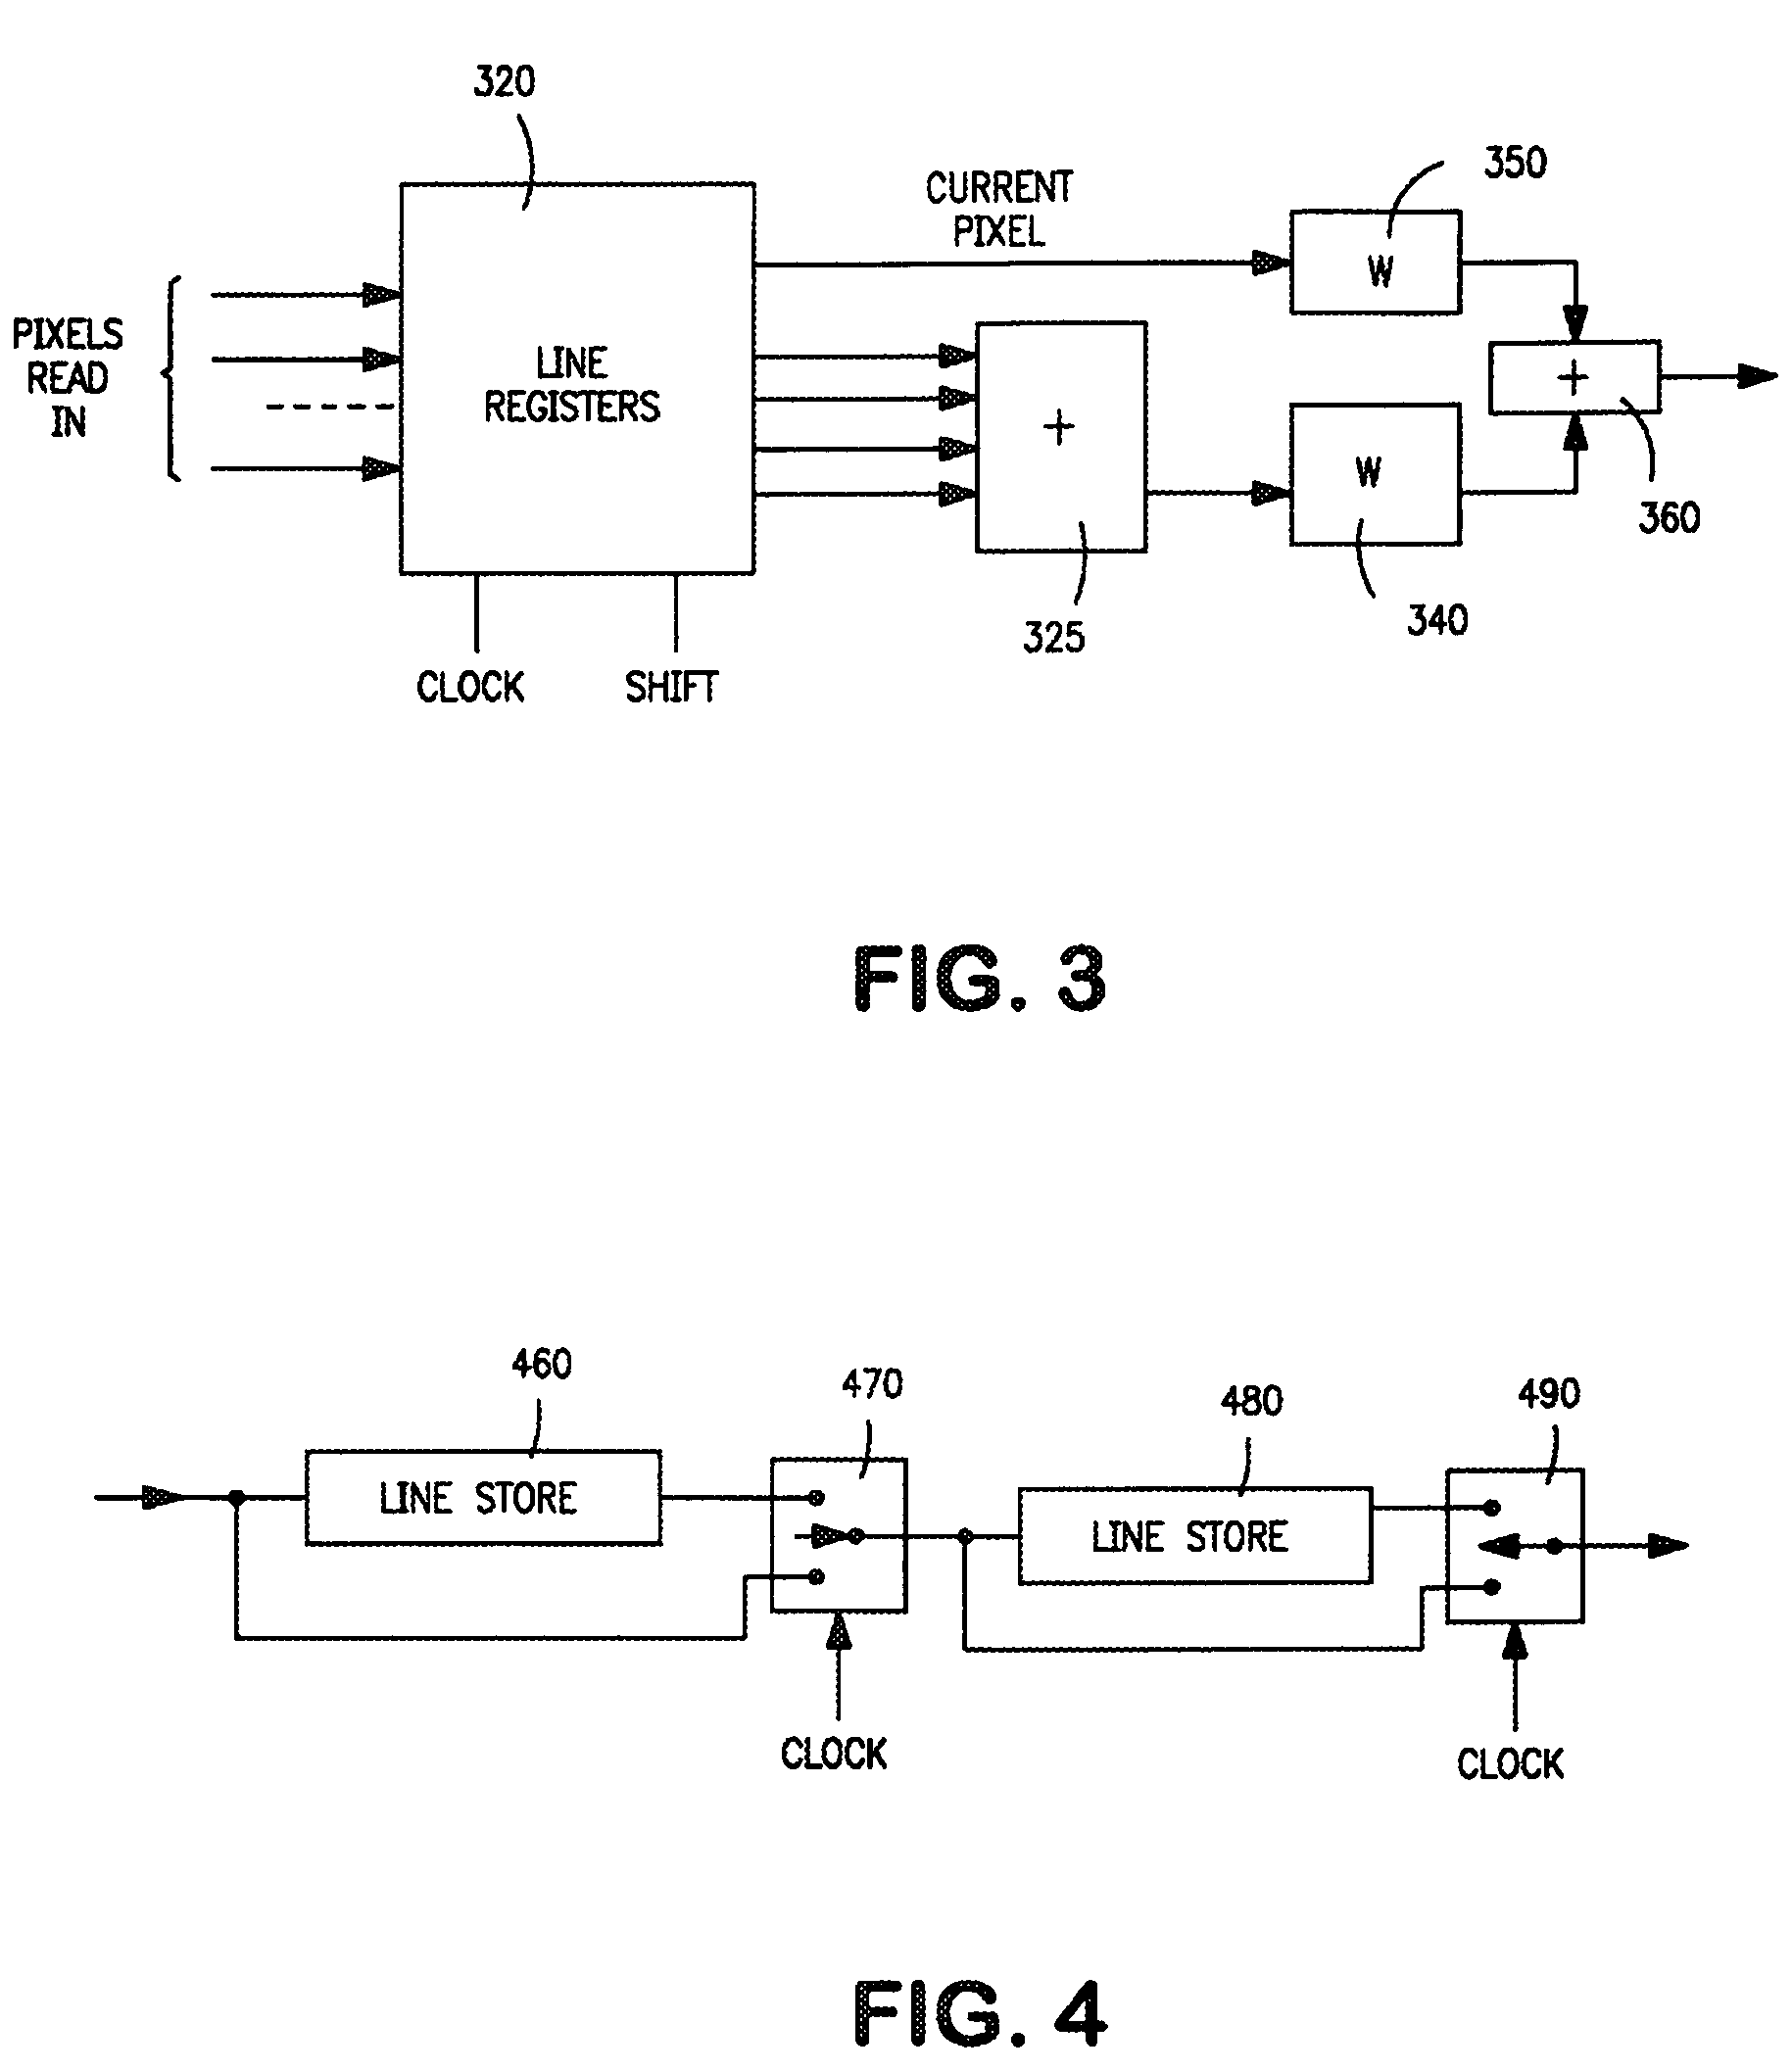 Apparatus and method for producing video signals